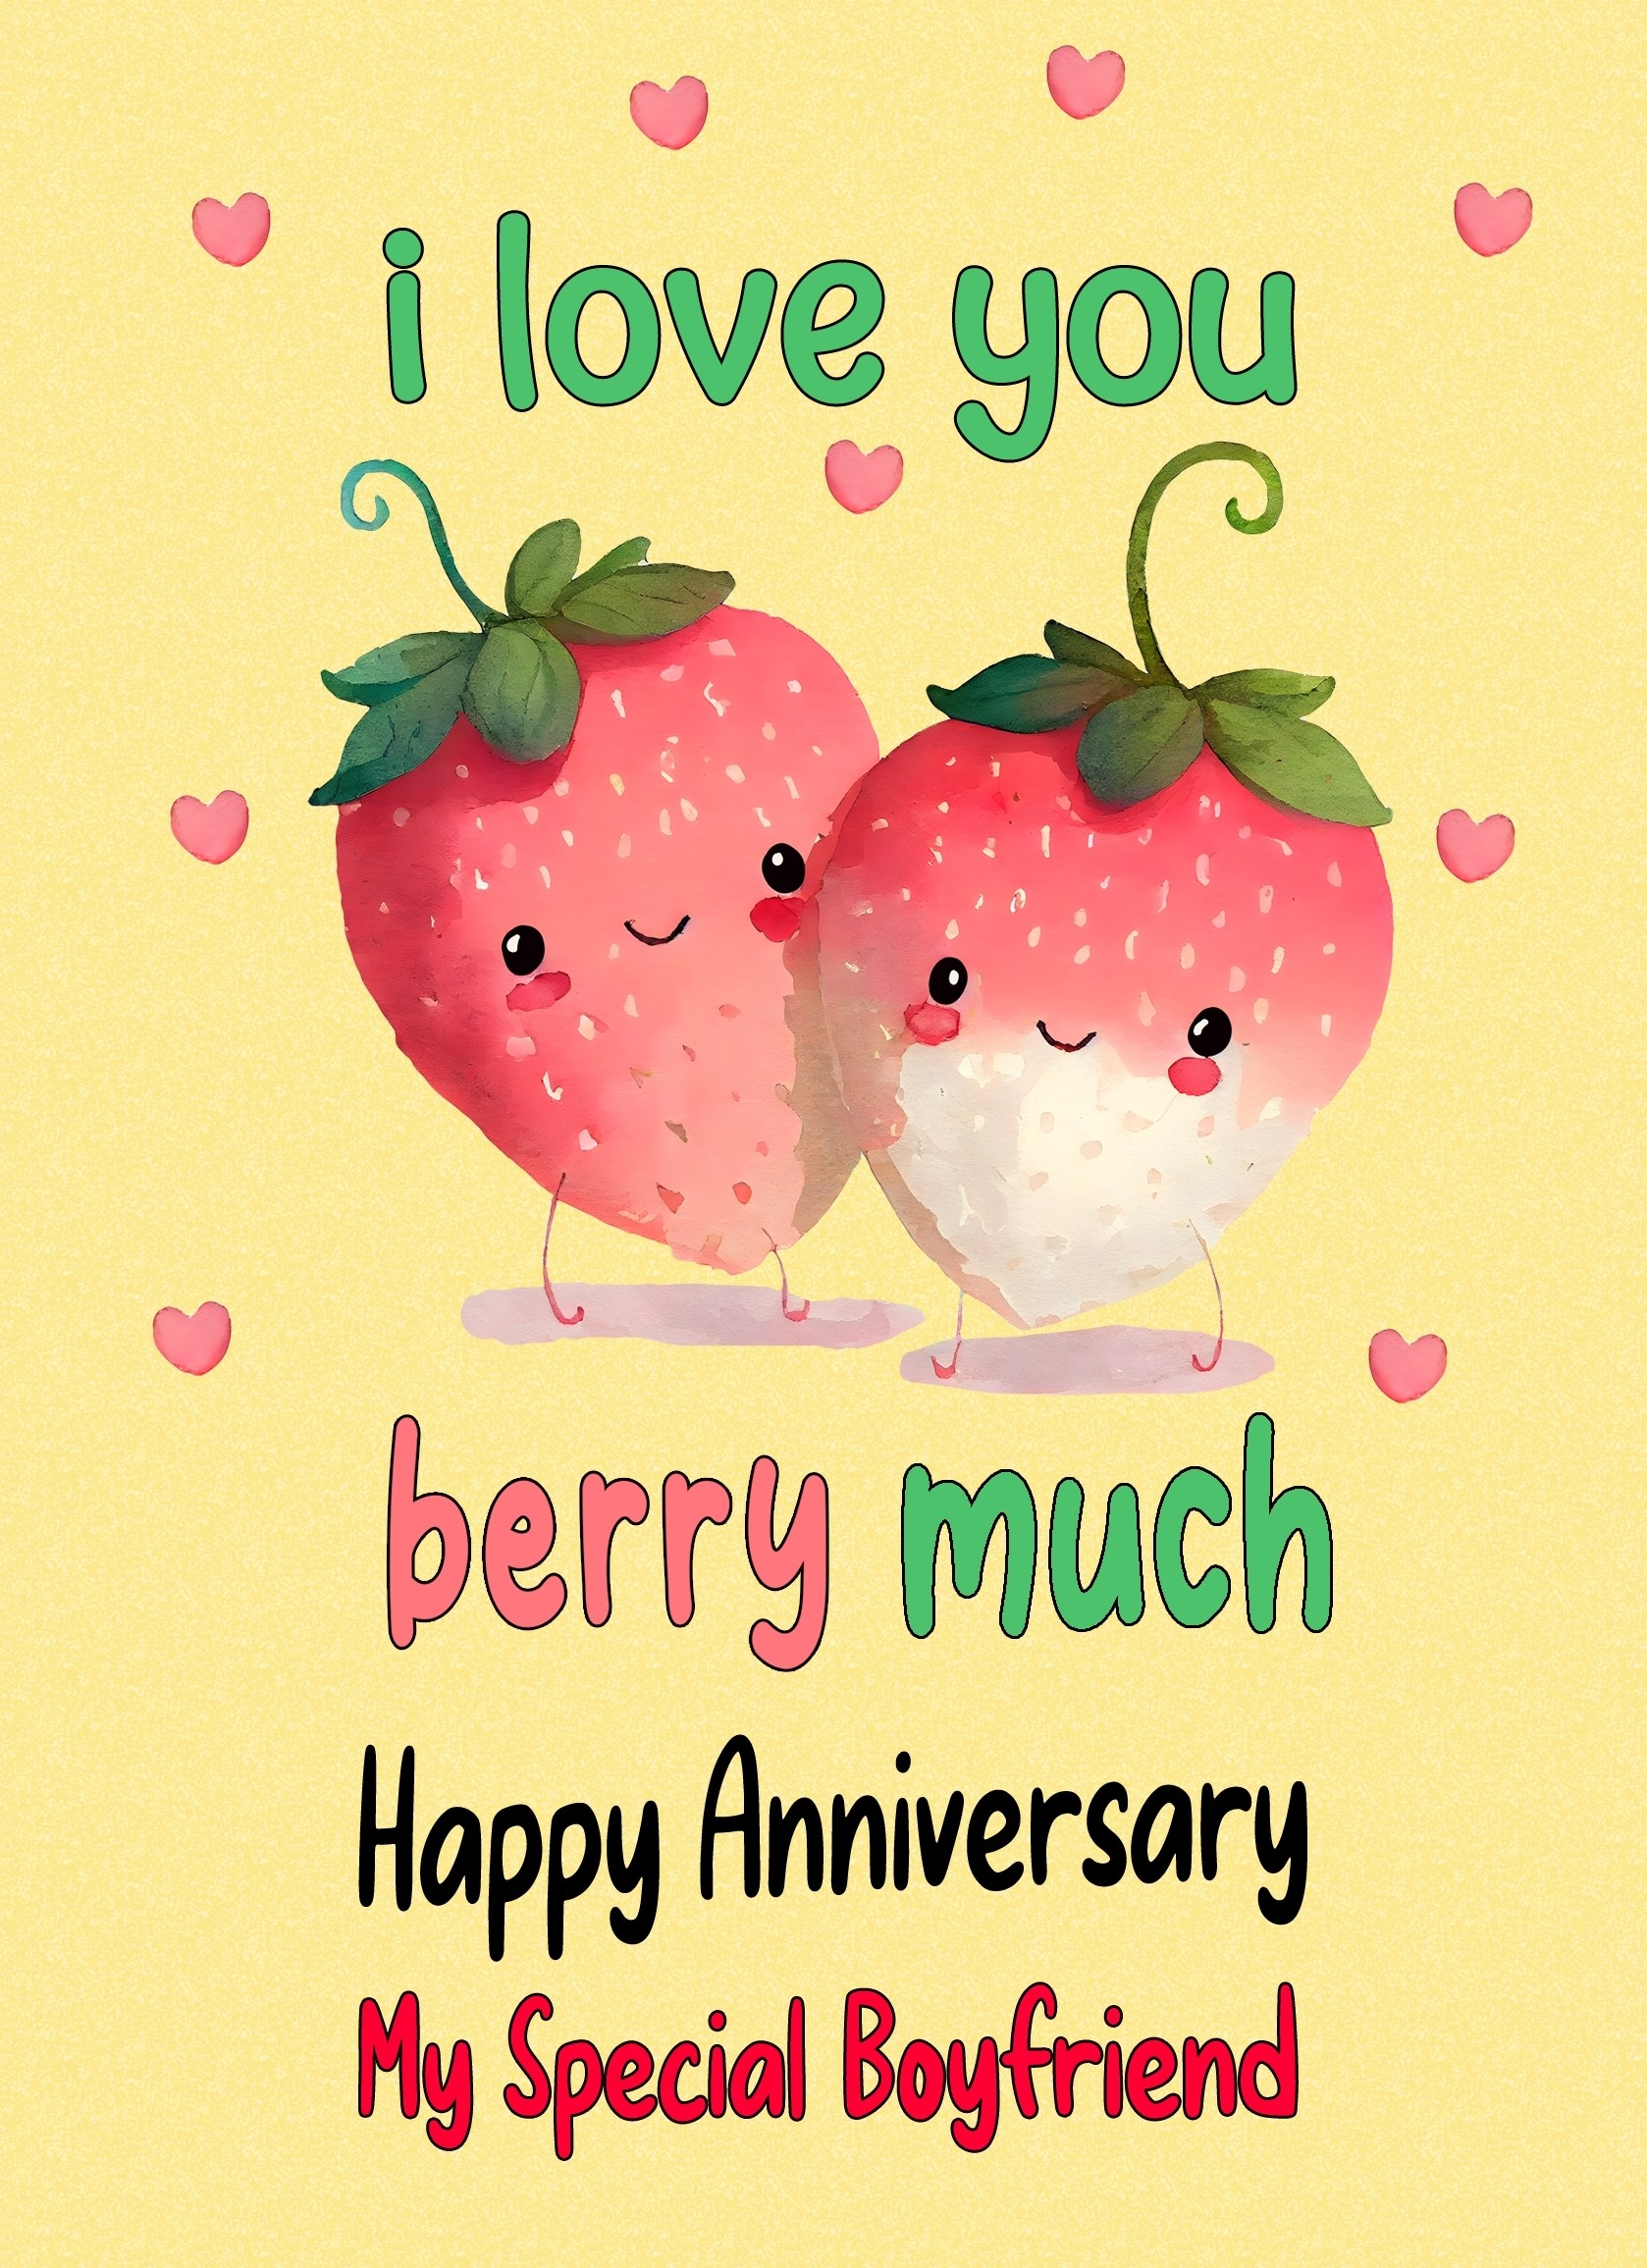 Funny Pun Romantic Anniversary Card for Boyfriend (Berry Much)